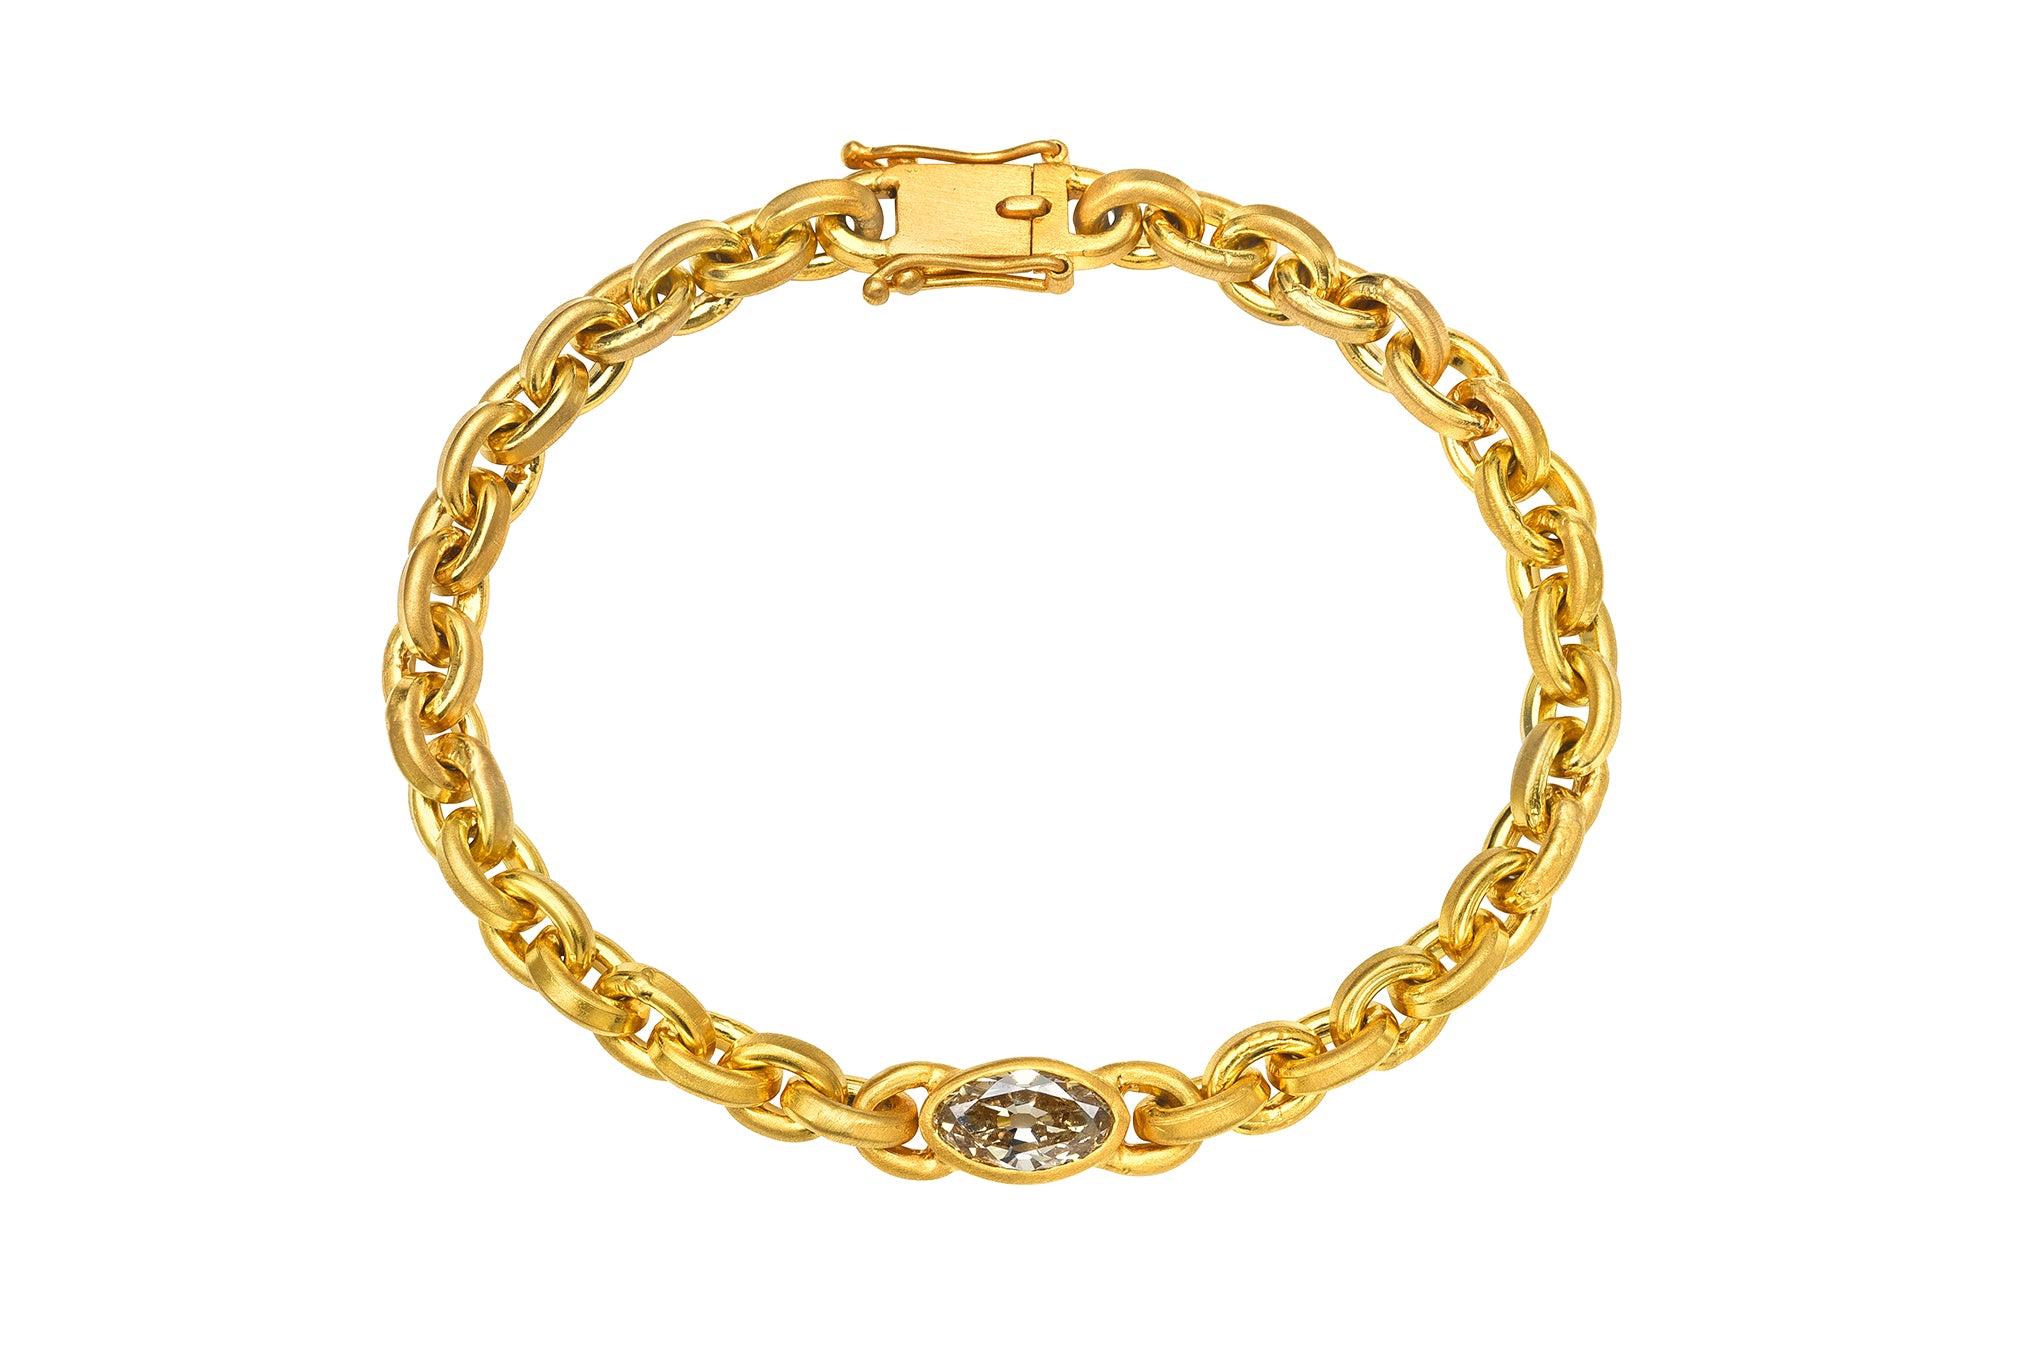 Darius Jewels one of a kind antique moval diamond signature oversized signature chain braclet